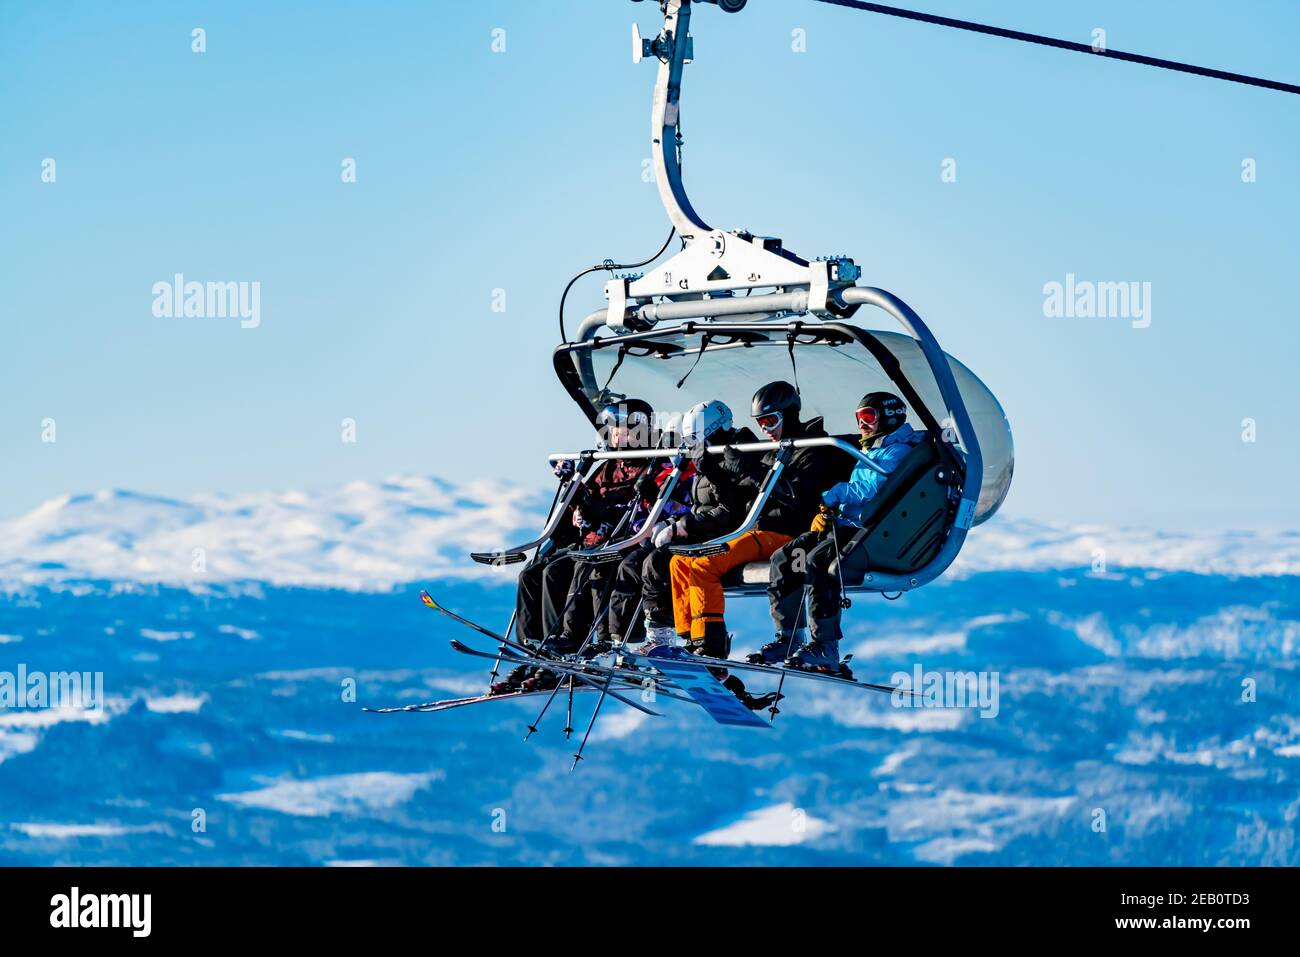 Group of skiers riding a ski lift to the top of a mountain at a ski resort. Stock Photo